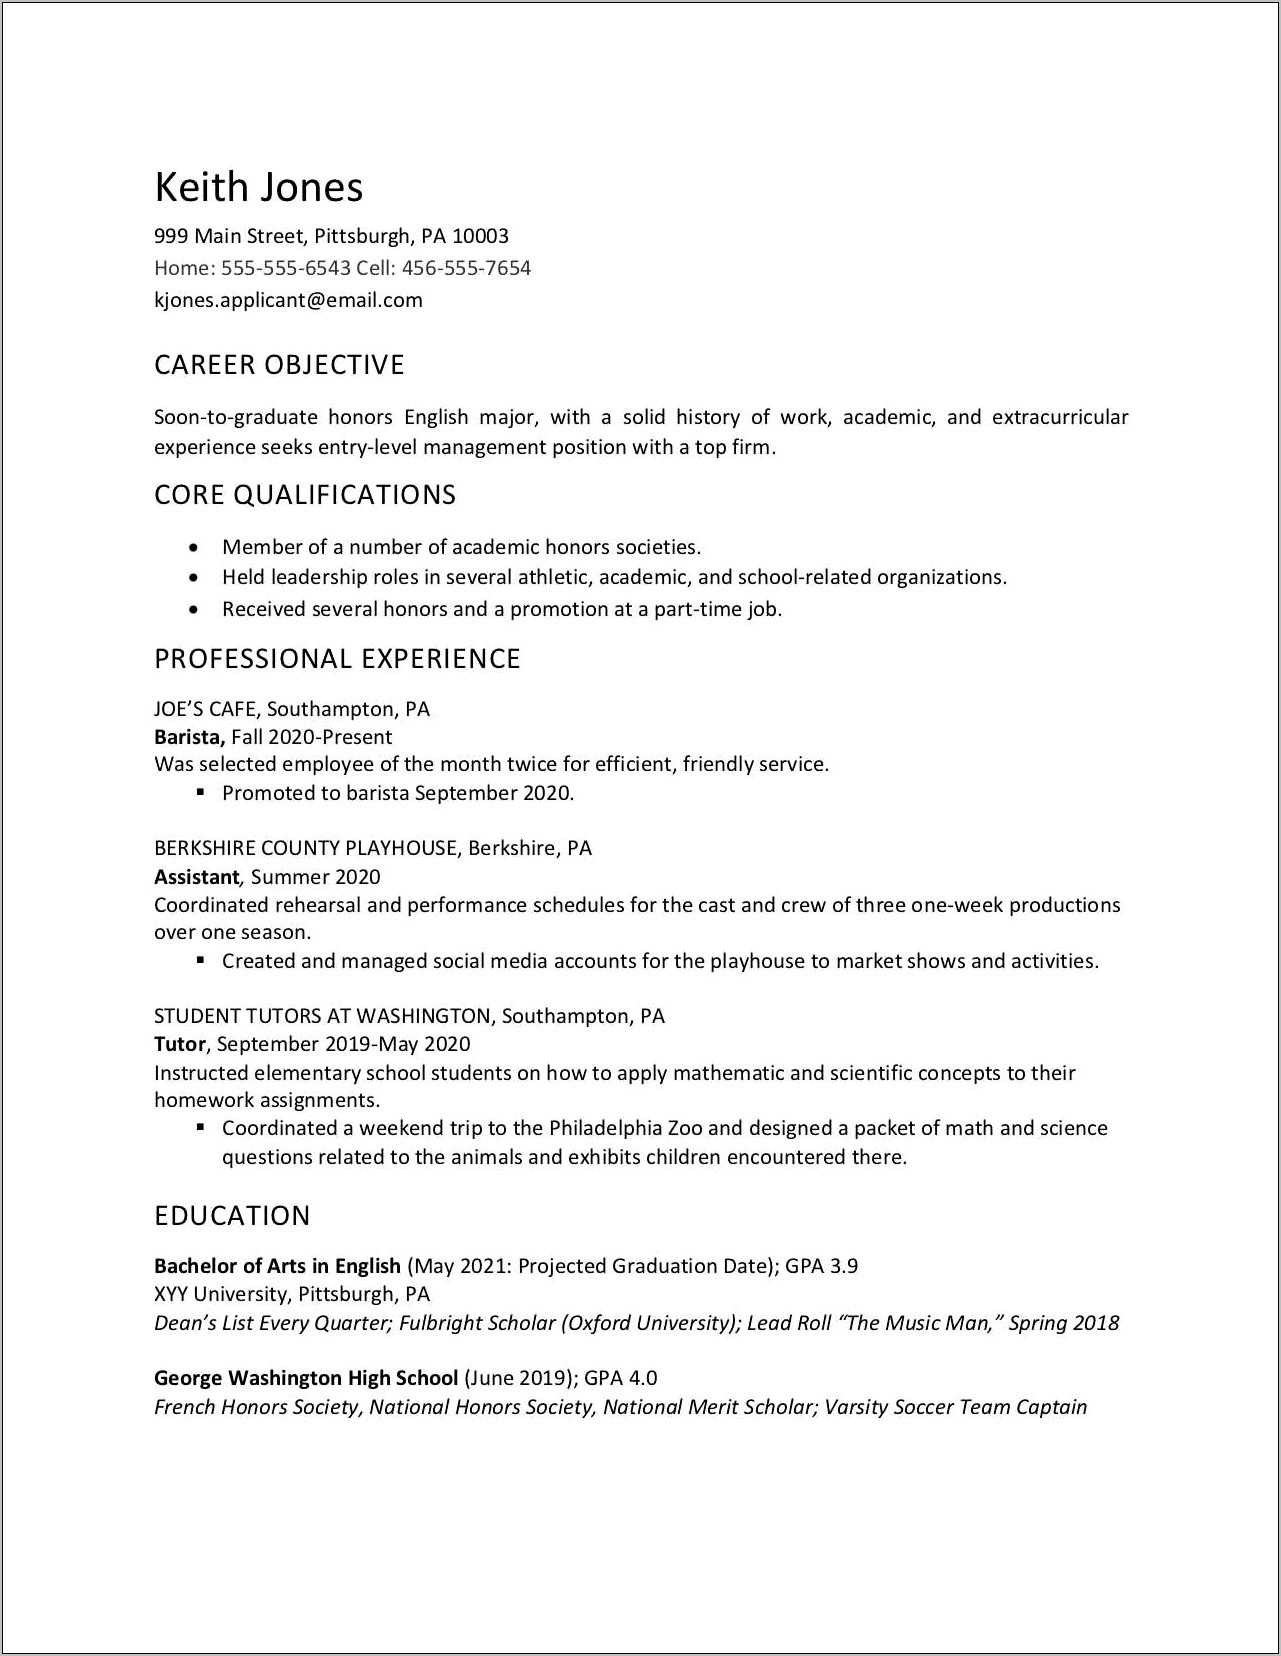 Education On Resume For High School Student